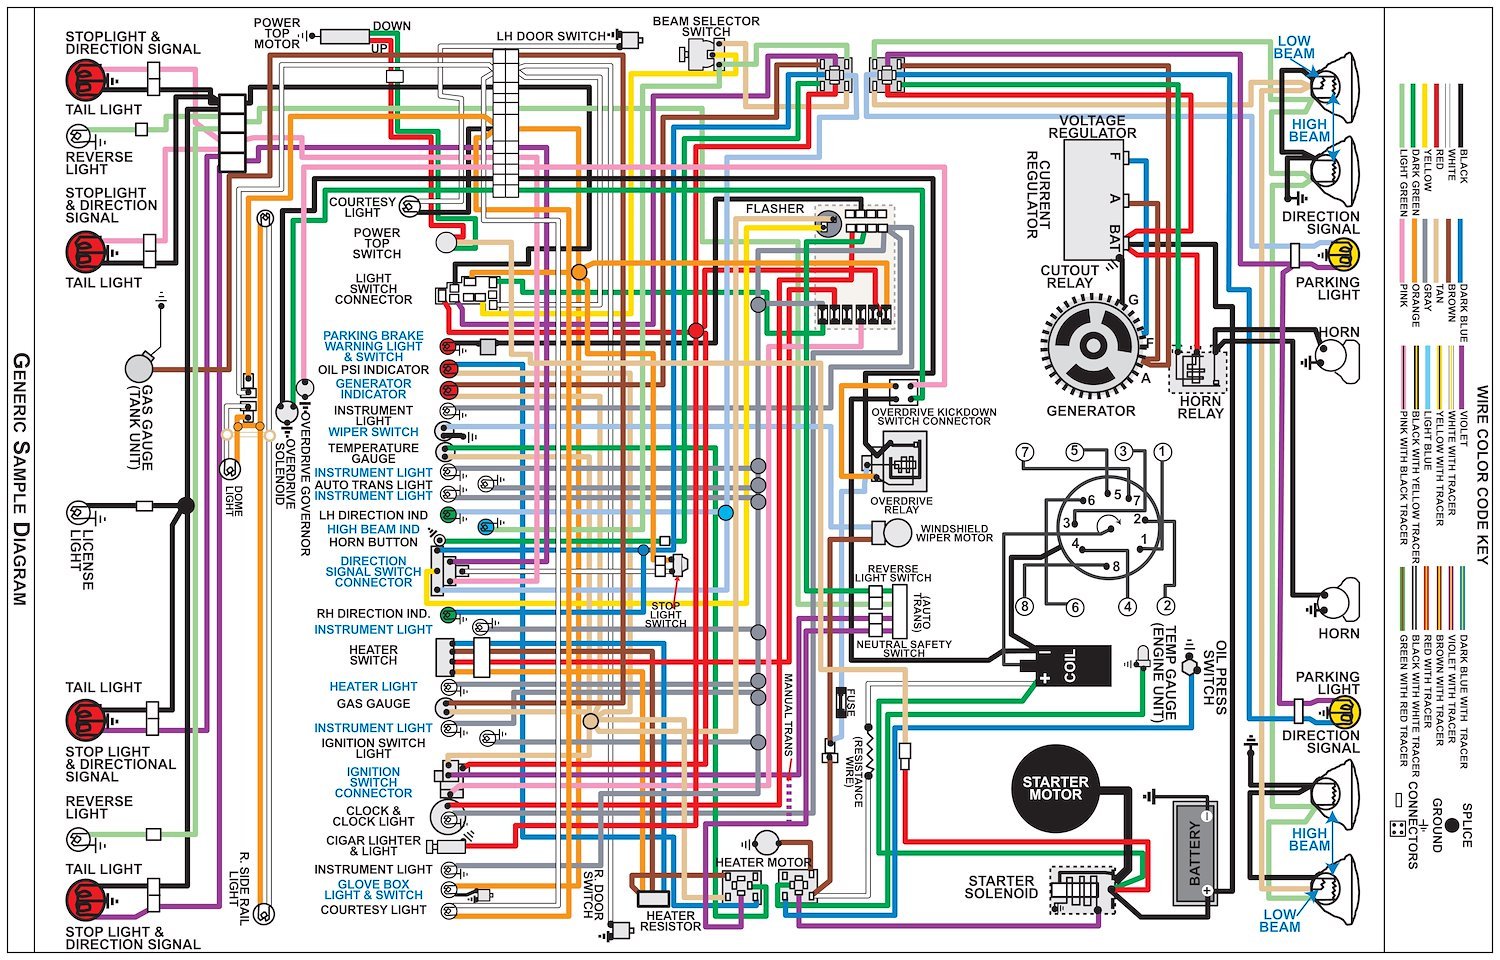 Wiring Diagram for 1976 Chevy Camaro (All Models), 11 in. x 17 in., Laminated